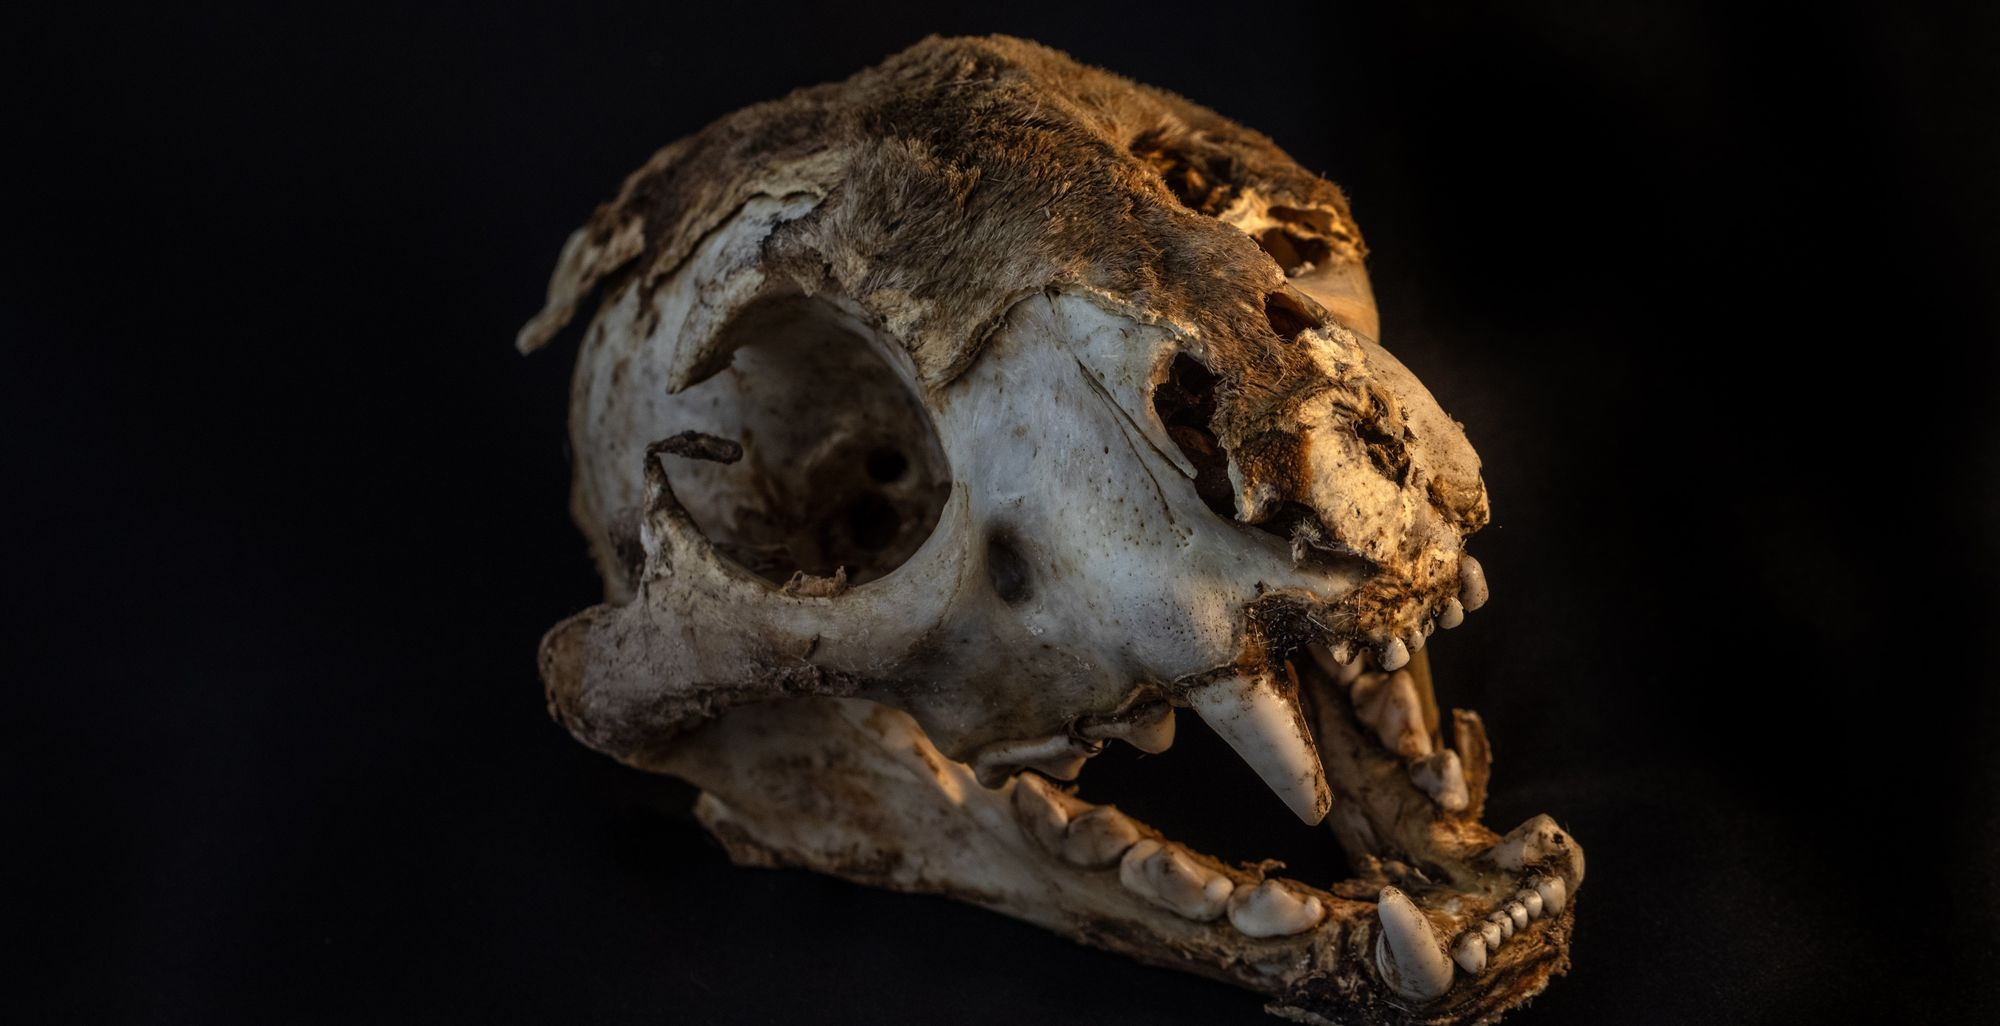 The skull of a puma that was shot after being caught in a trap in the protected area of Boqueirão da Onça, or Jaguars’ Ravine. Photo: Photo: Dado Galdieri / The Wall Street Journal